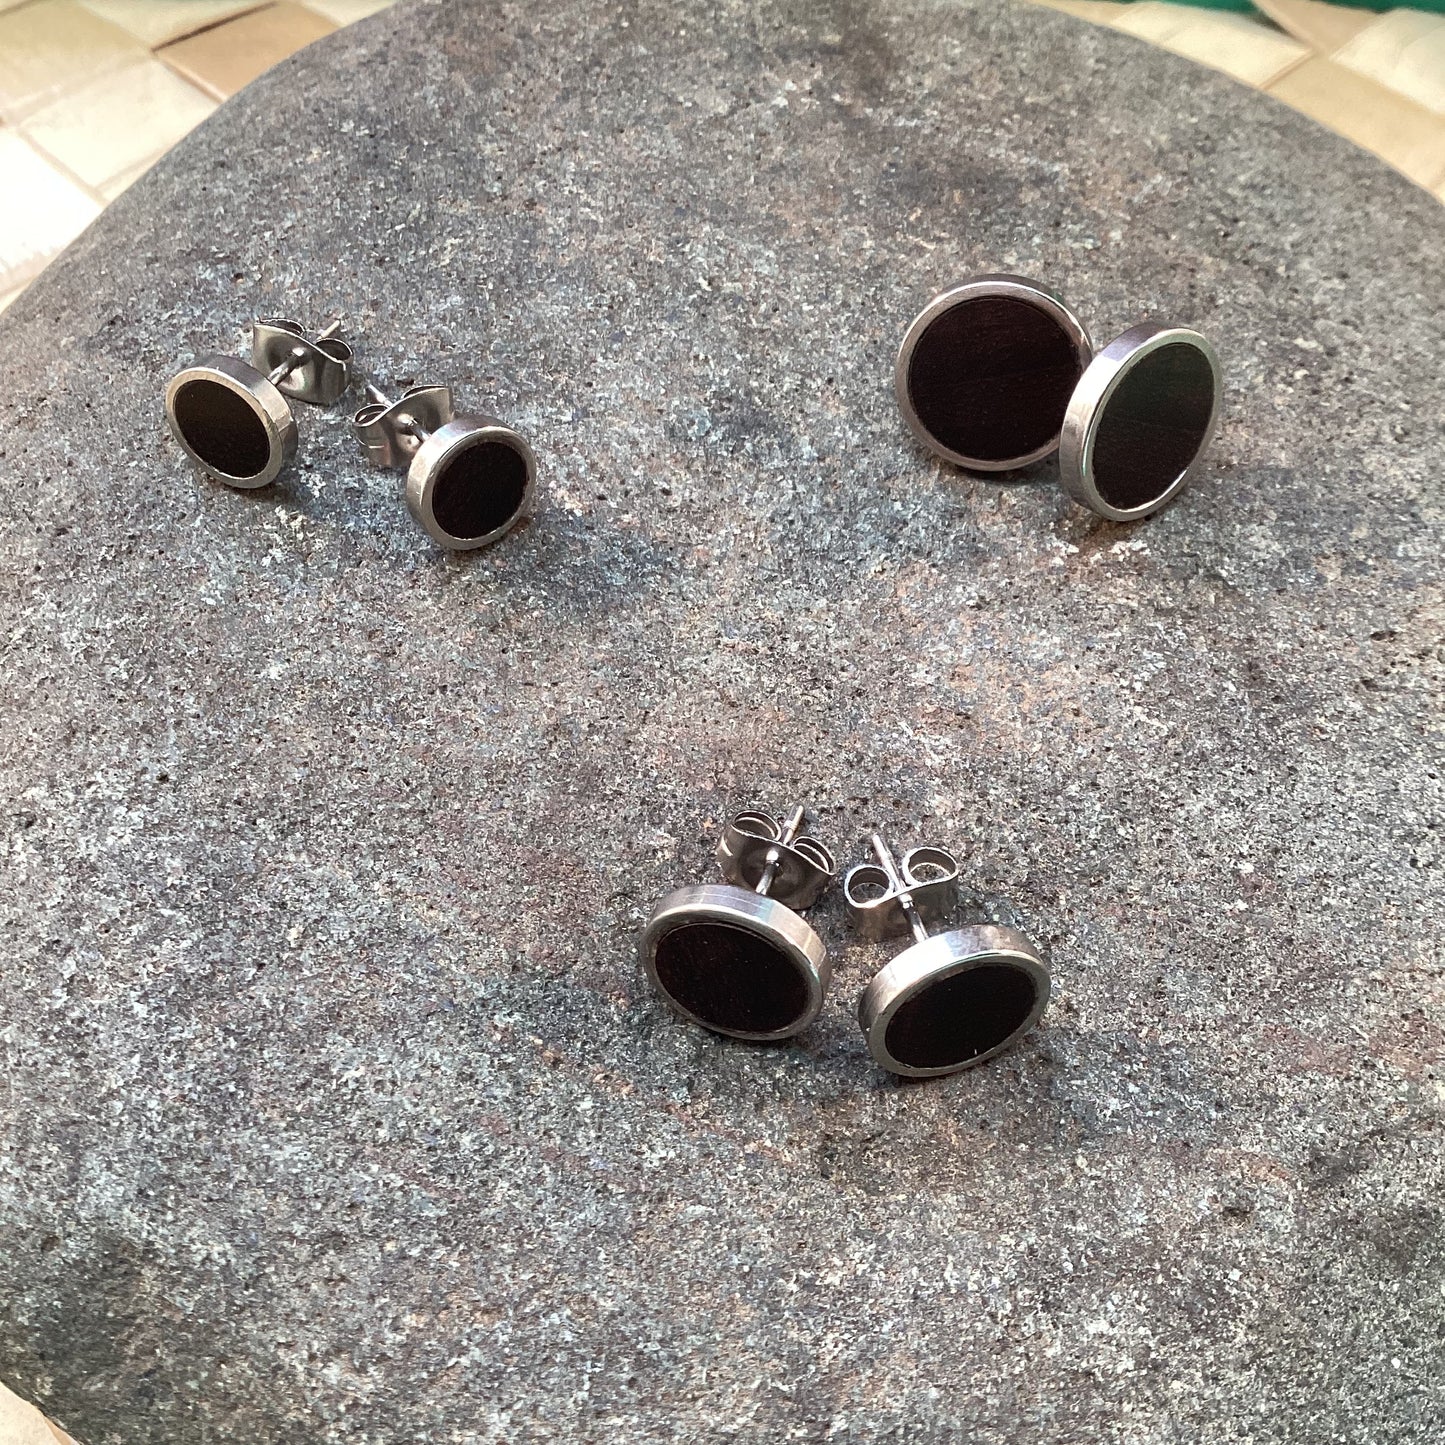 Black ebony wood and stainless steel, round post earrings.